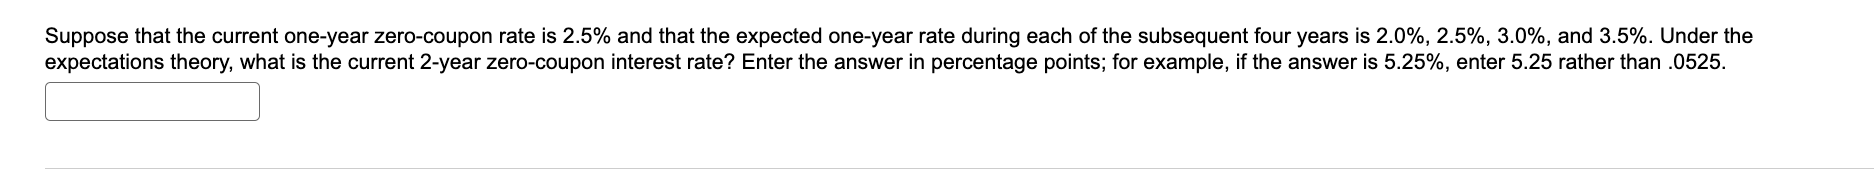 Suppose that the current one-year zero-coupon rate is 2.5% and that the expected one-year rate during each of